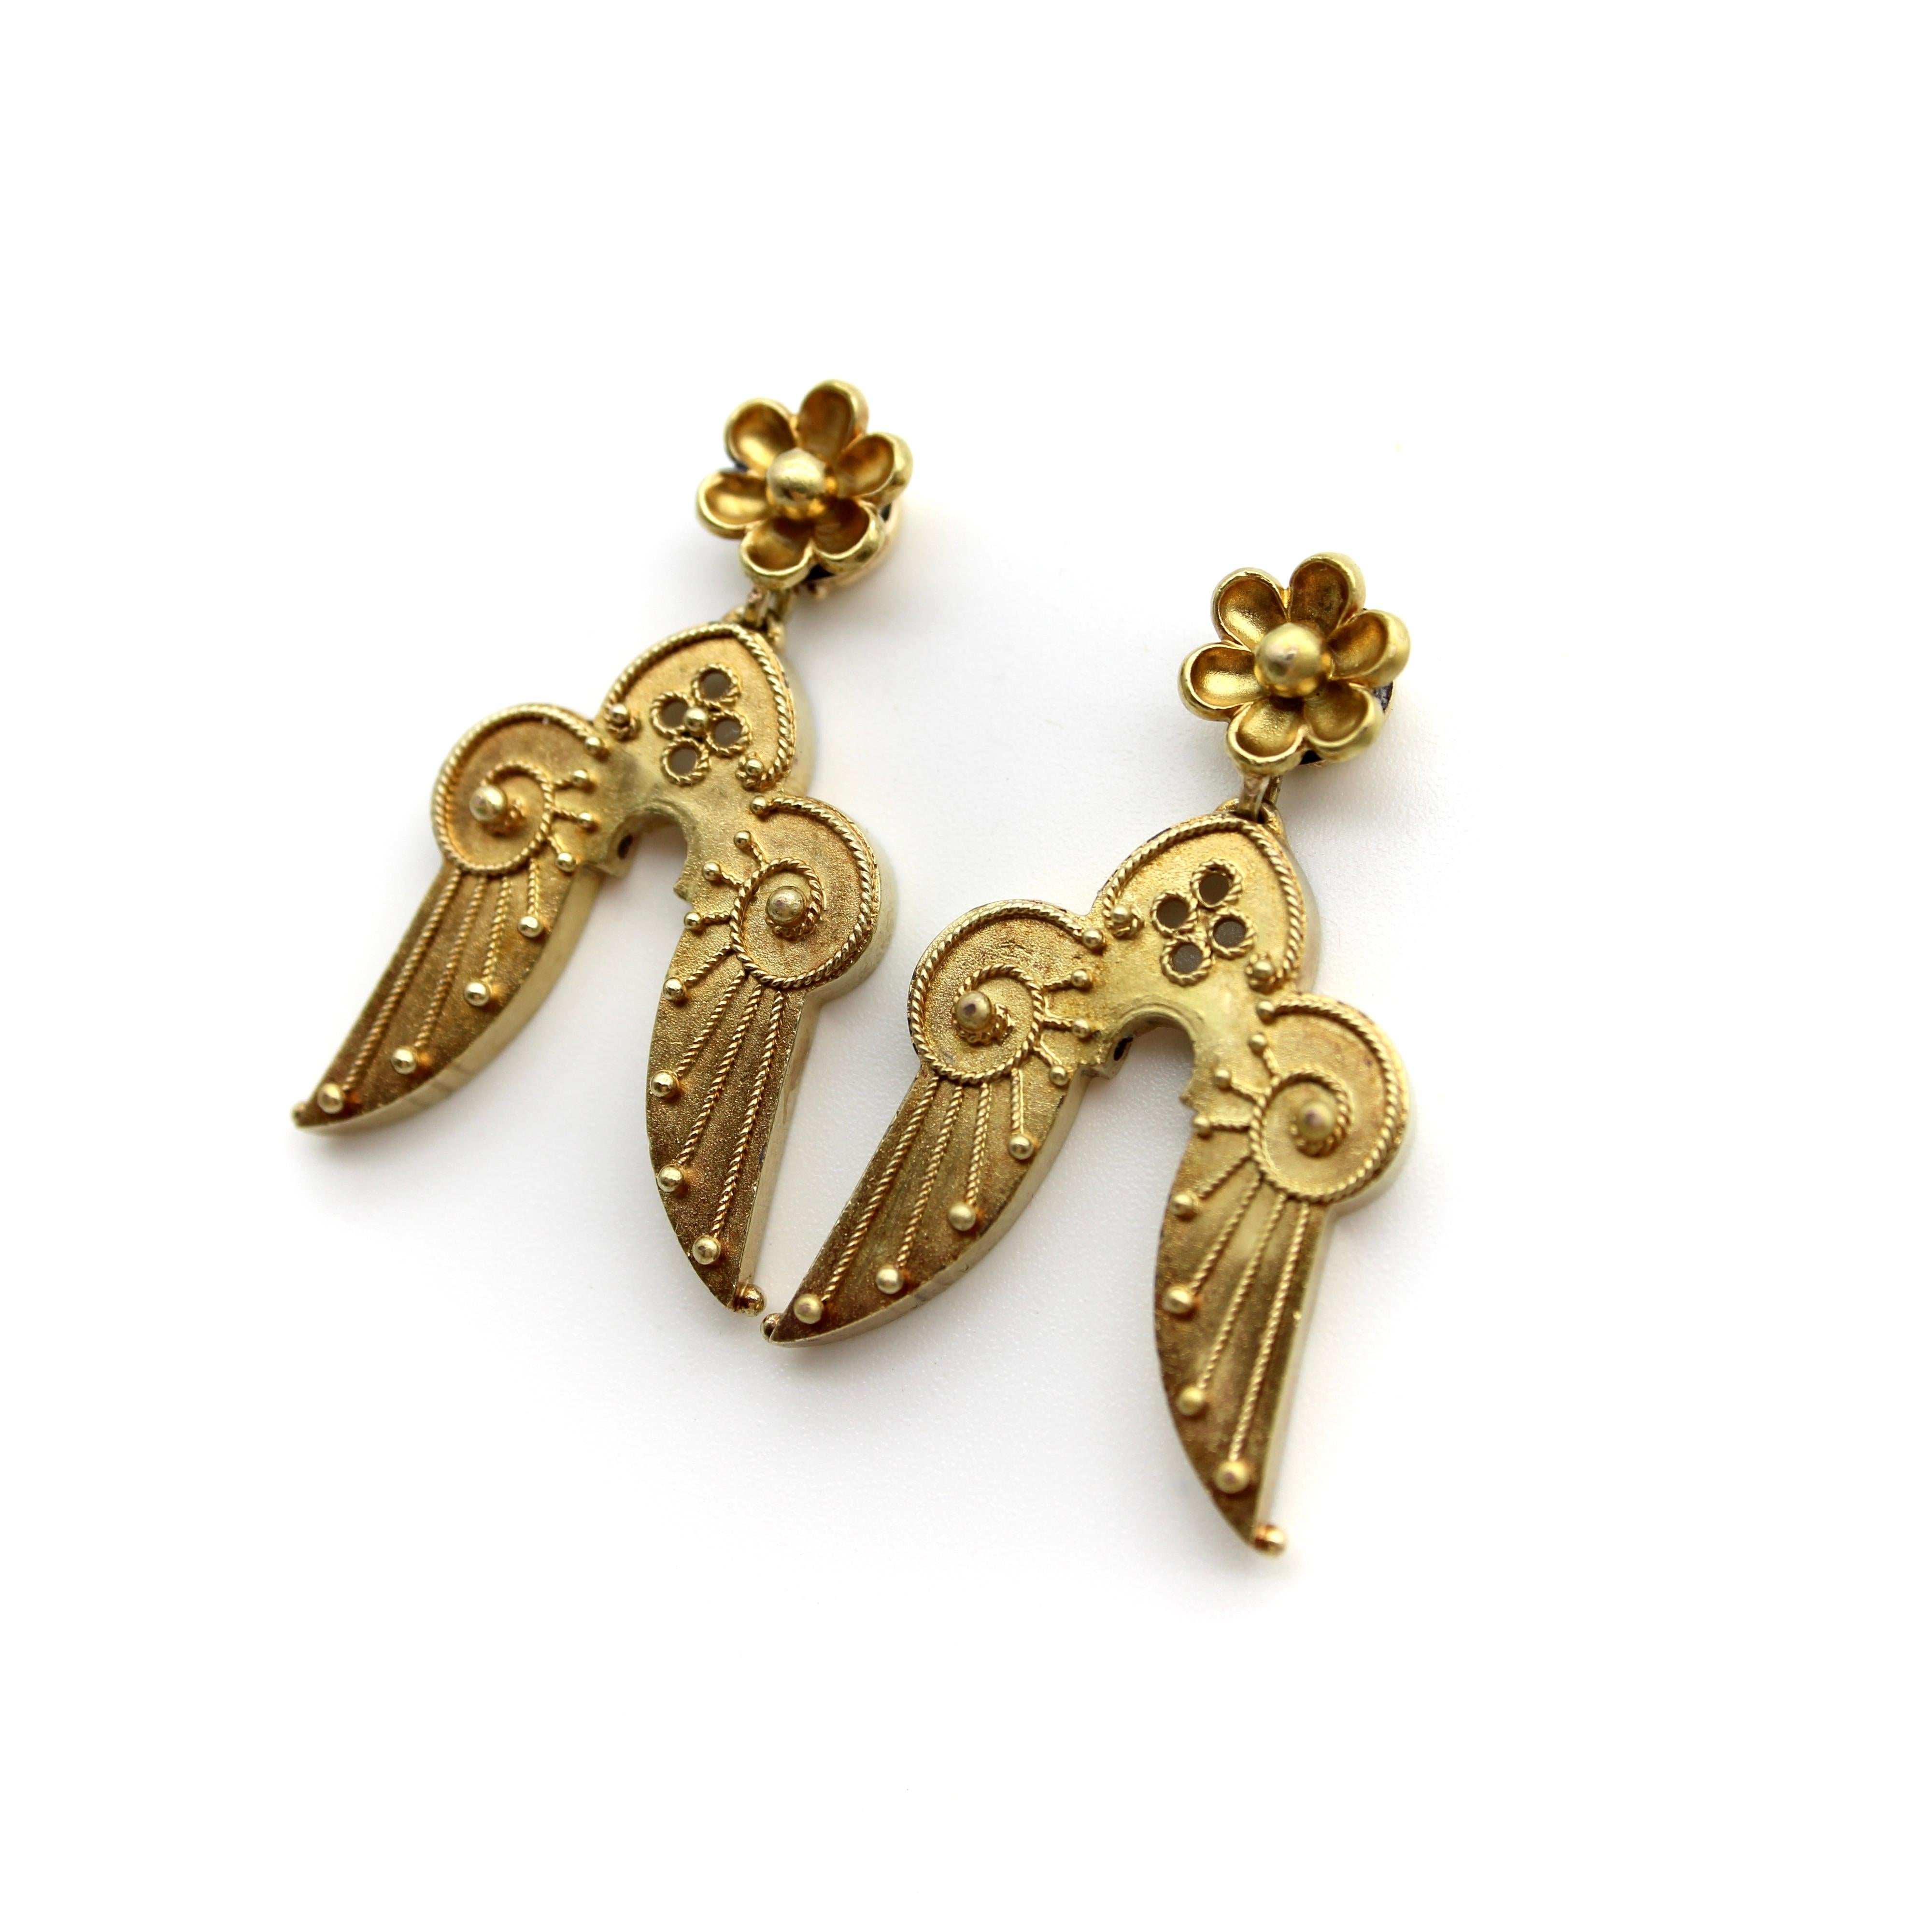 Circa the Victorian era, these 14k gold Etruscan Revival earrings are reminiscent of angel wings. Suspended from golden flowers, the earrings are finely detailed, adorned with twisted wirework and gold beading. Their angelic motif has a double